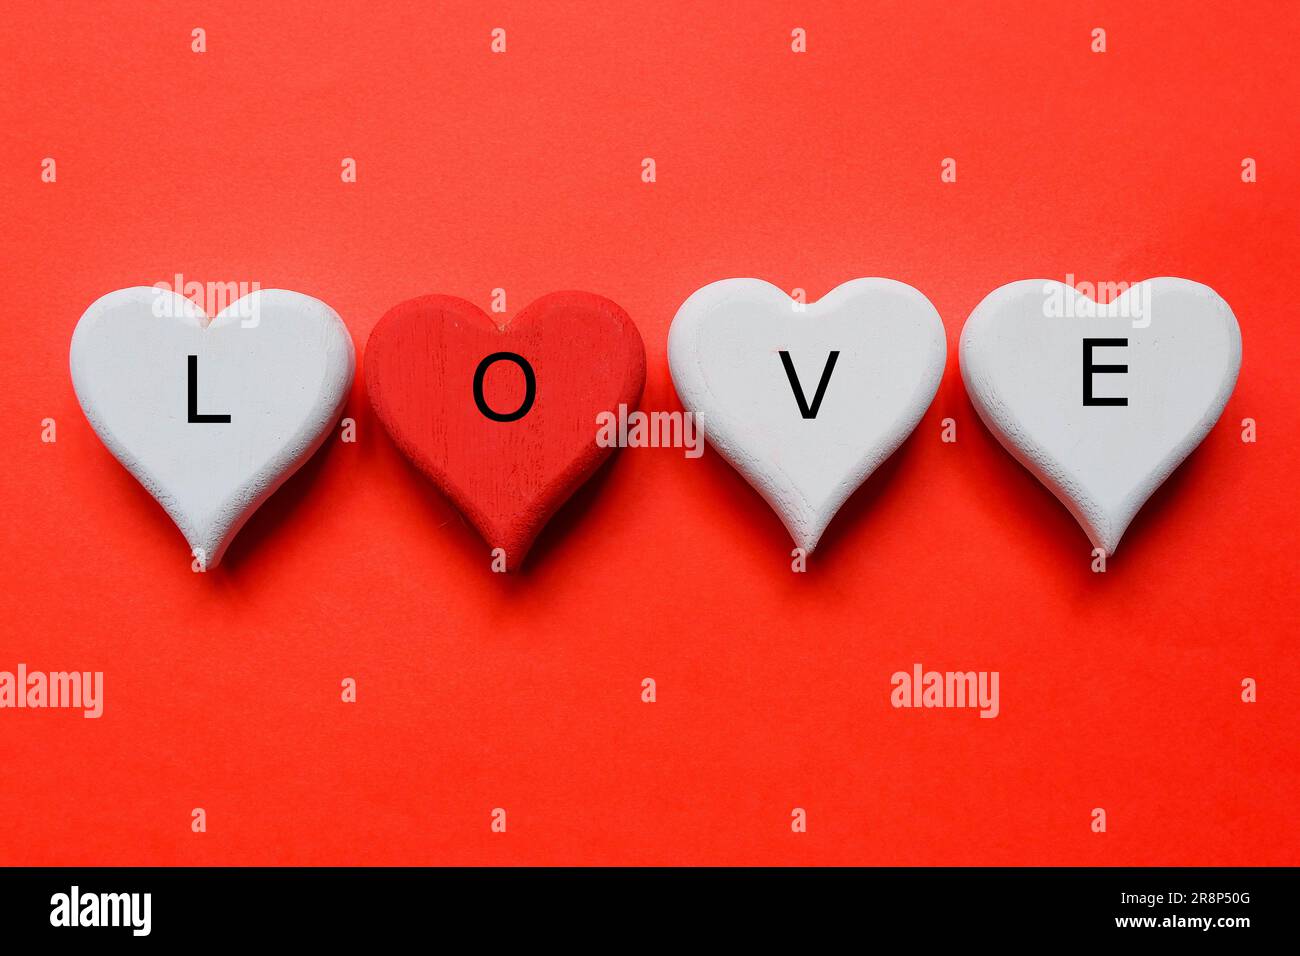 https://c8.alamy.com/comp/2R8P50G/top-view-of-white-and-red-wooden-handcraft-heart-symbol-written-with-love-on-red-background-valentines-day-theme-2R8P50G.jpg